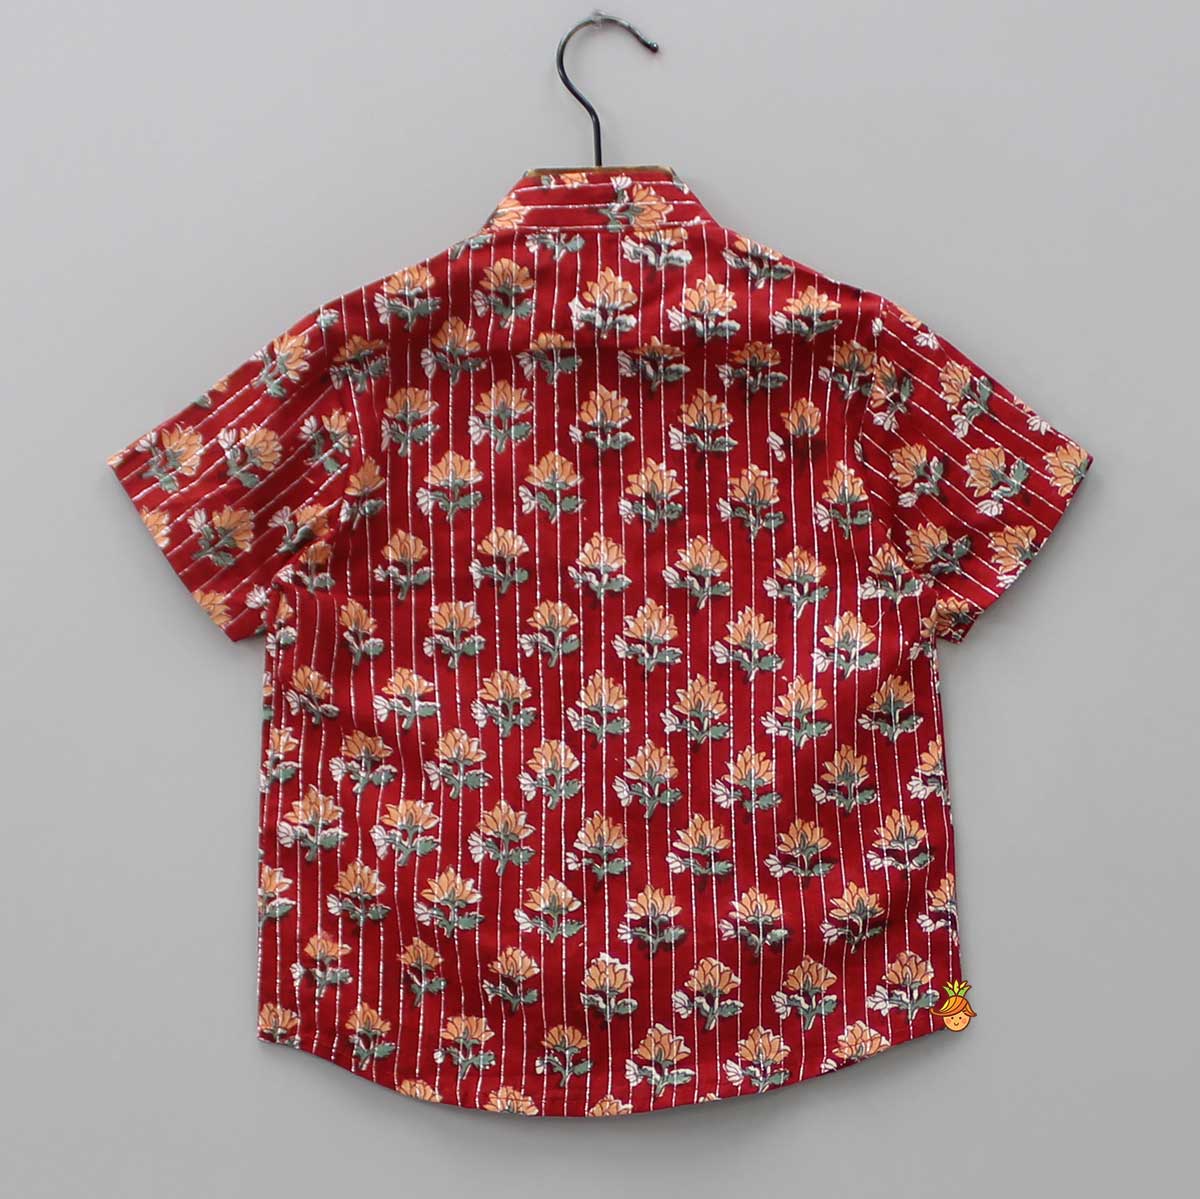 Floral Printed Patch Pocket Detail Red Shirt